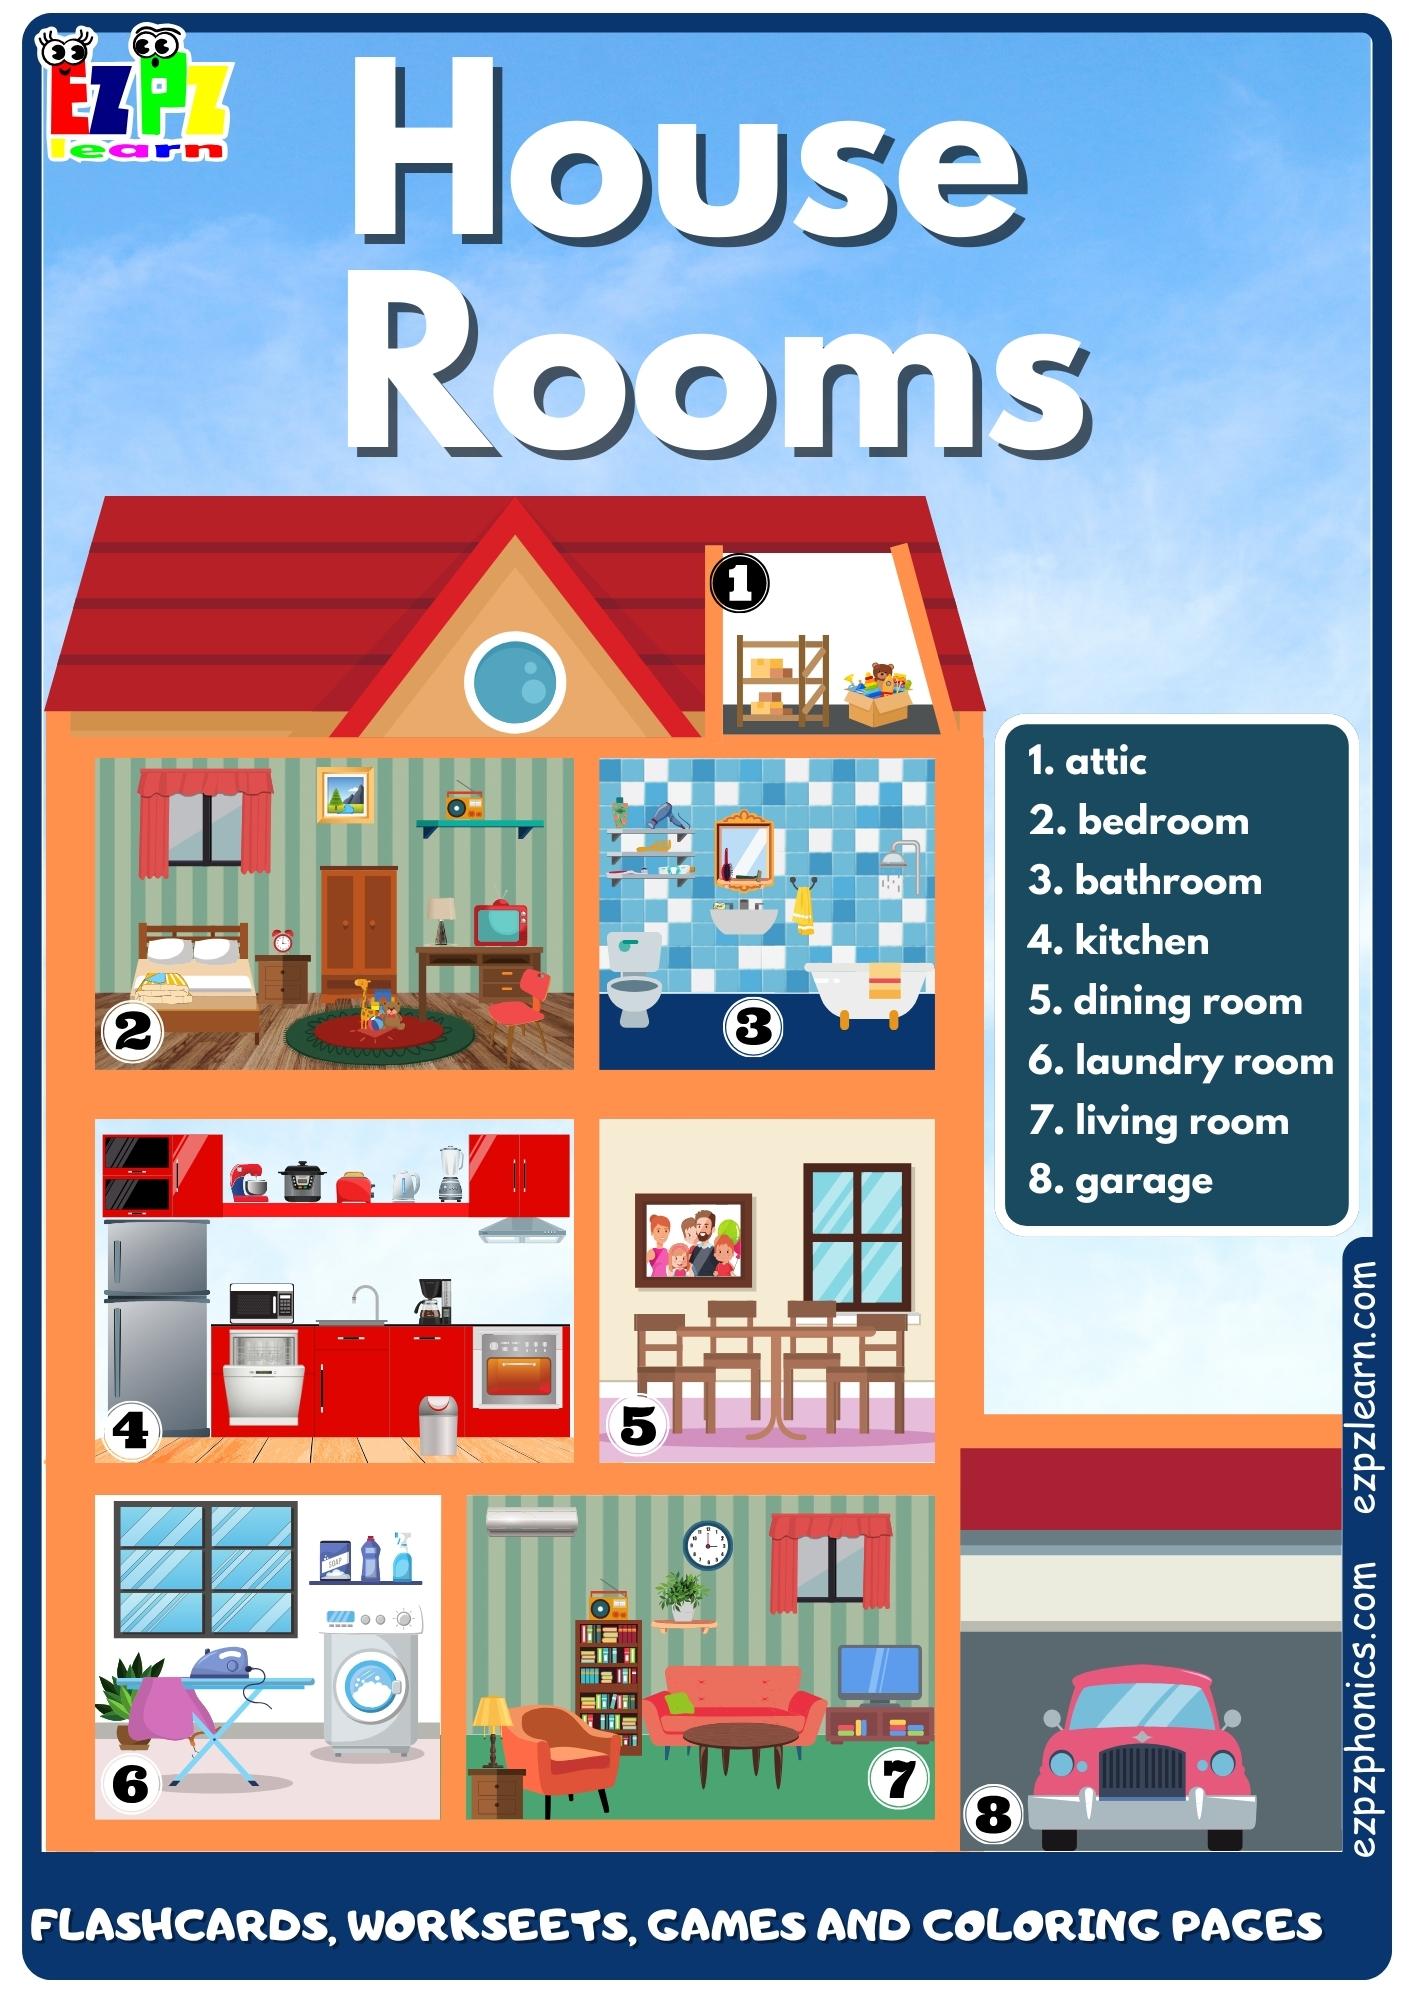 Rooms in the house  Learning english for kids, English classroom posters,  Vocabulary